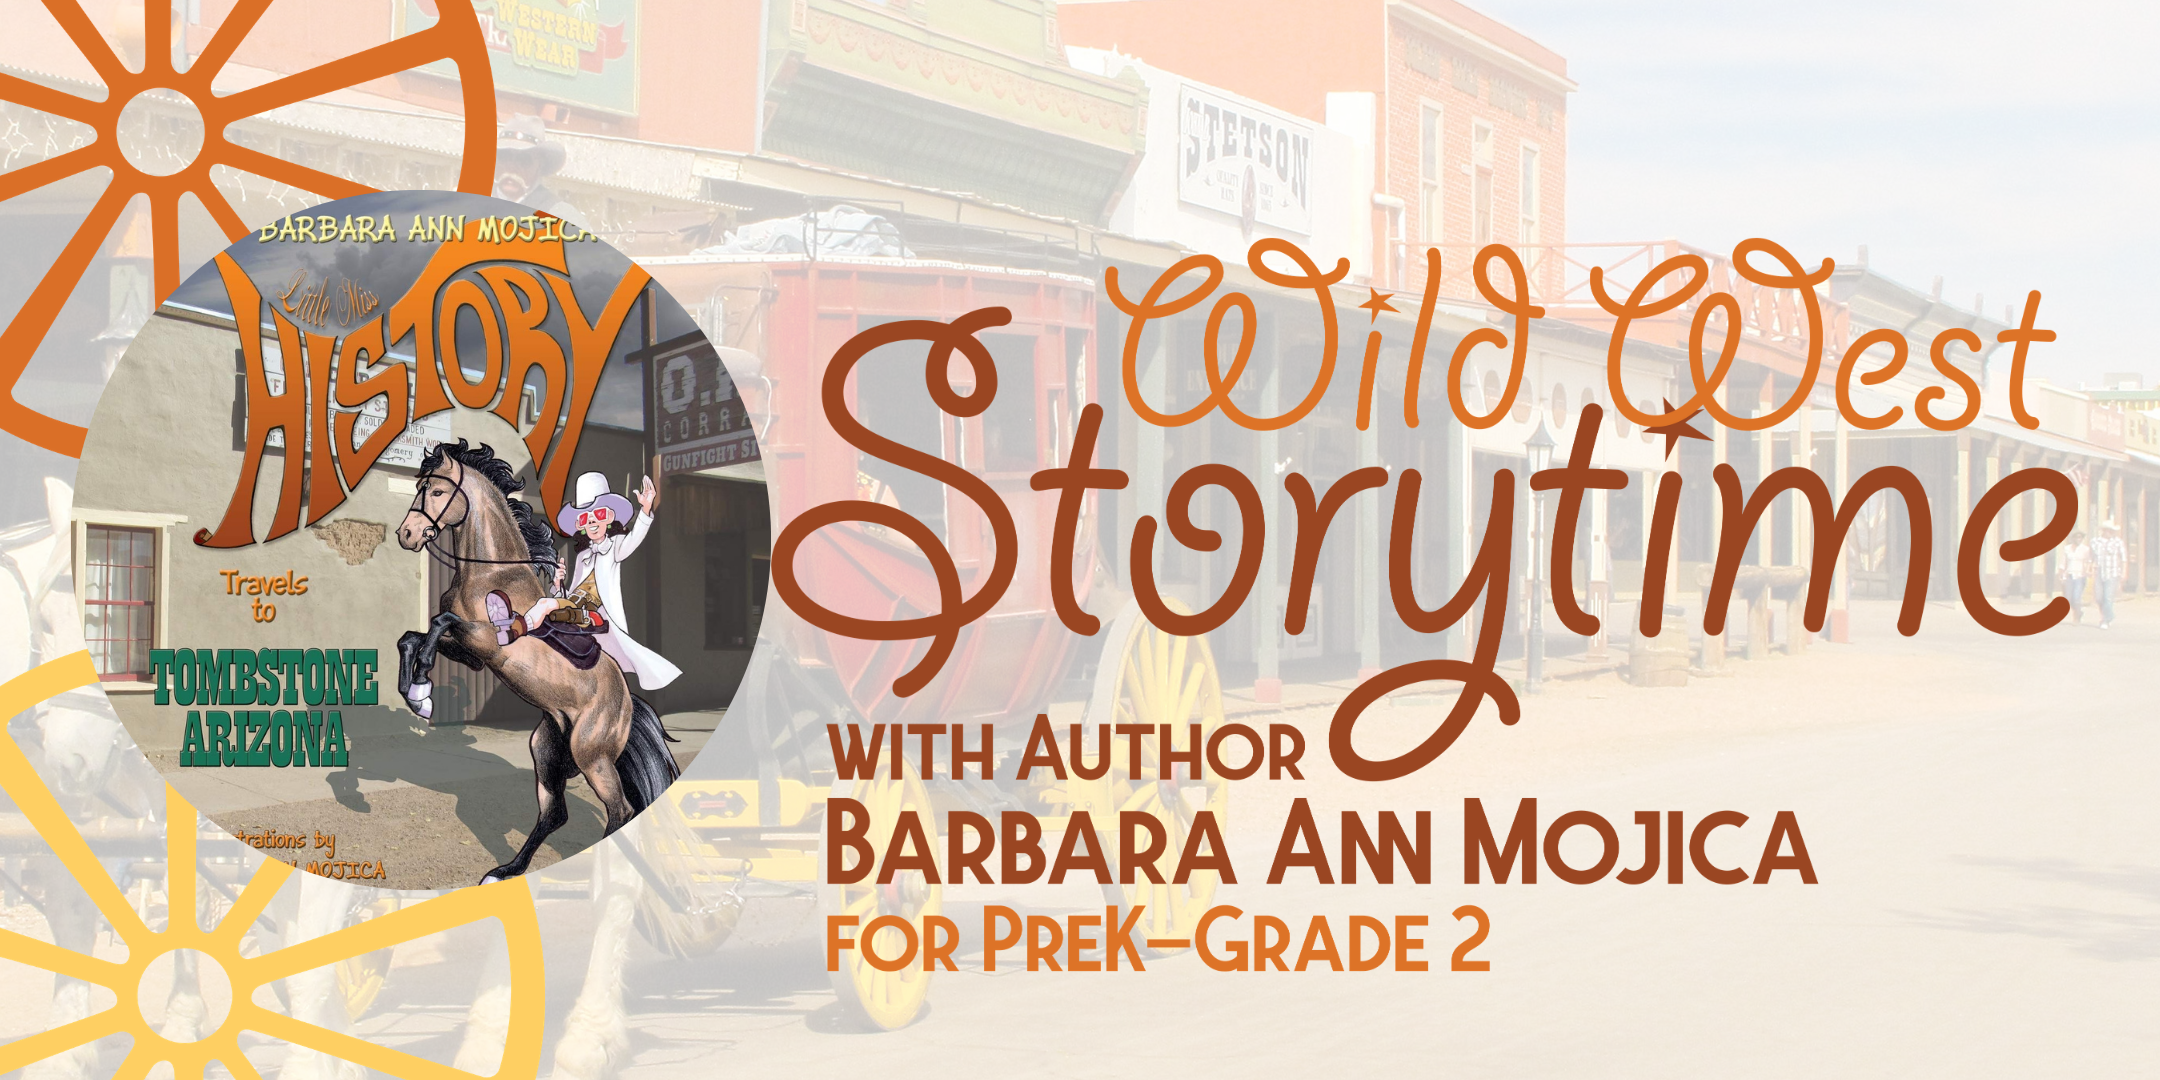 Wild West Storytime with Author Barbara Ann Mojica image